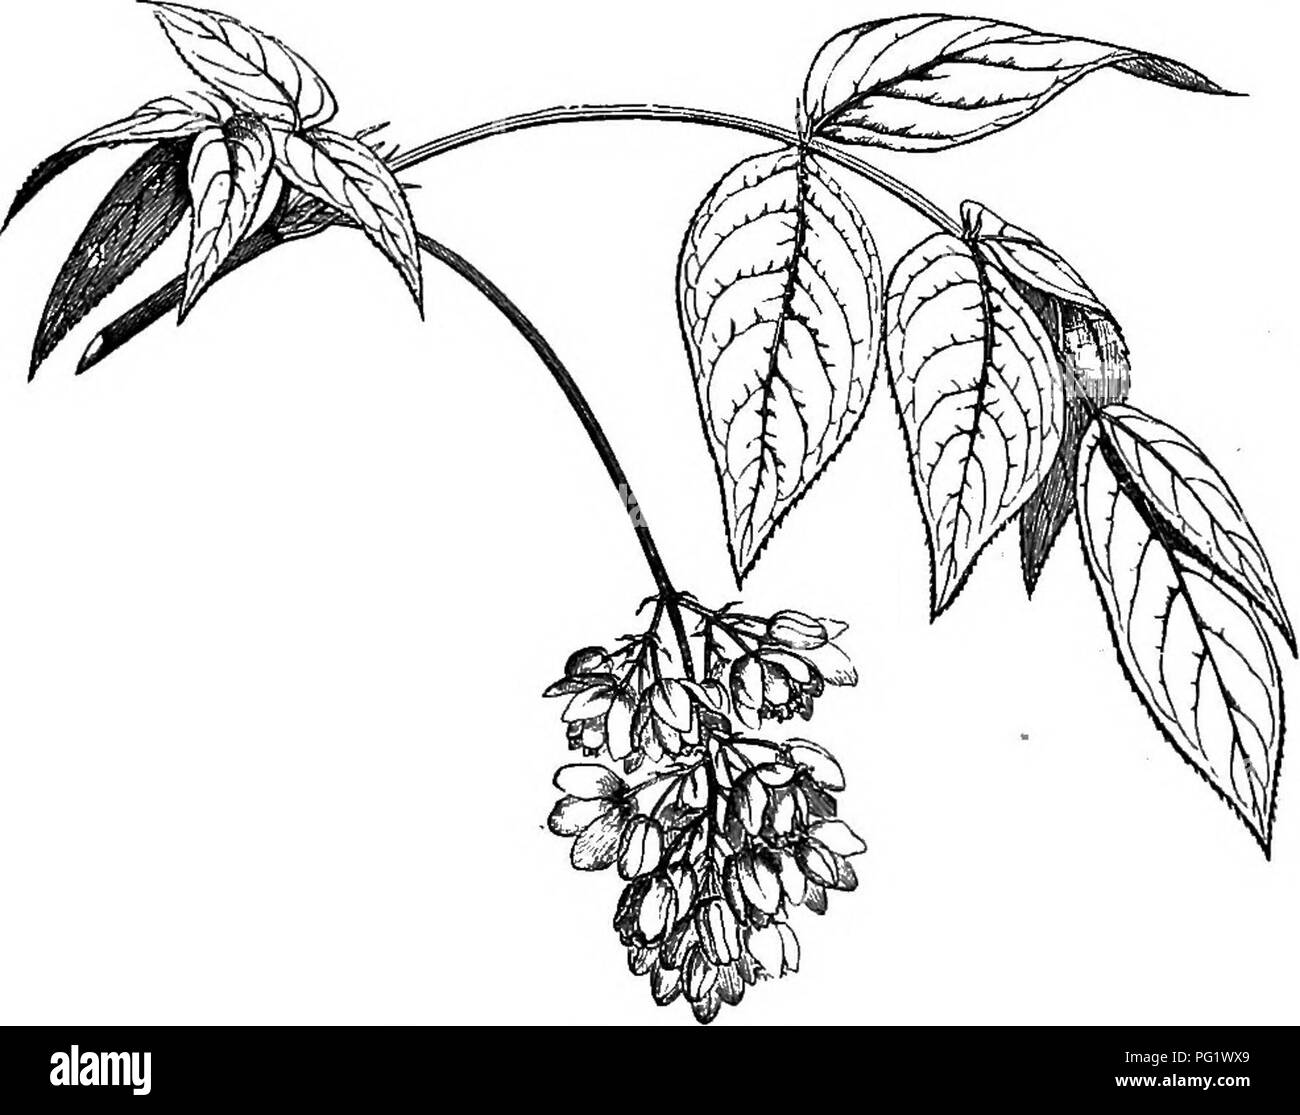 . The natural history of plants. Botany. XLIII. SAPINDACE^. 1. STAPHTLEA SEEIE8. We commence tlie study of this group by tlie analysis, not of a Staphylea (fig, 335, 339-351), but ratber of a Triceros^ wbose flowers (fig. 336) are regular, bermapbrodite, witb a receptacle in tbe form of a cup of little deptb. Tbe edges bear five sepals and an equal number of perigynous petals, botb imbricate, five altemipe- Staphylea pinnata.. Fig. 335. Floriferous branch. talous stamens, also perigynous, each formed of a free thread and a bilocular introrse anther dehiscing by two longitudinal clefts, and als Stock Photo